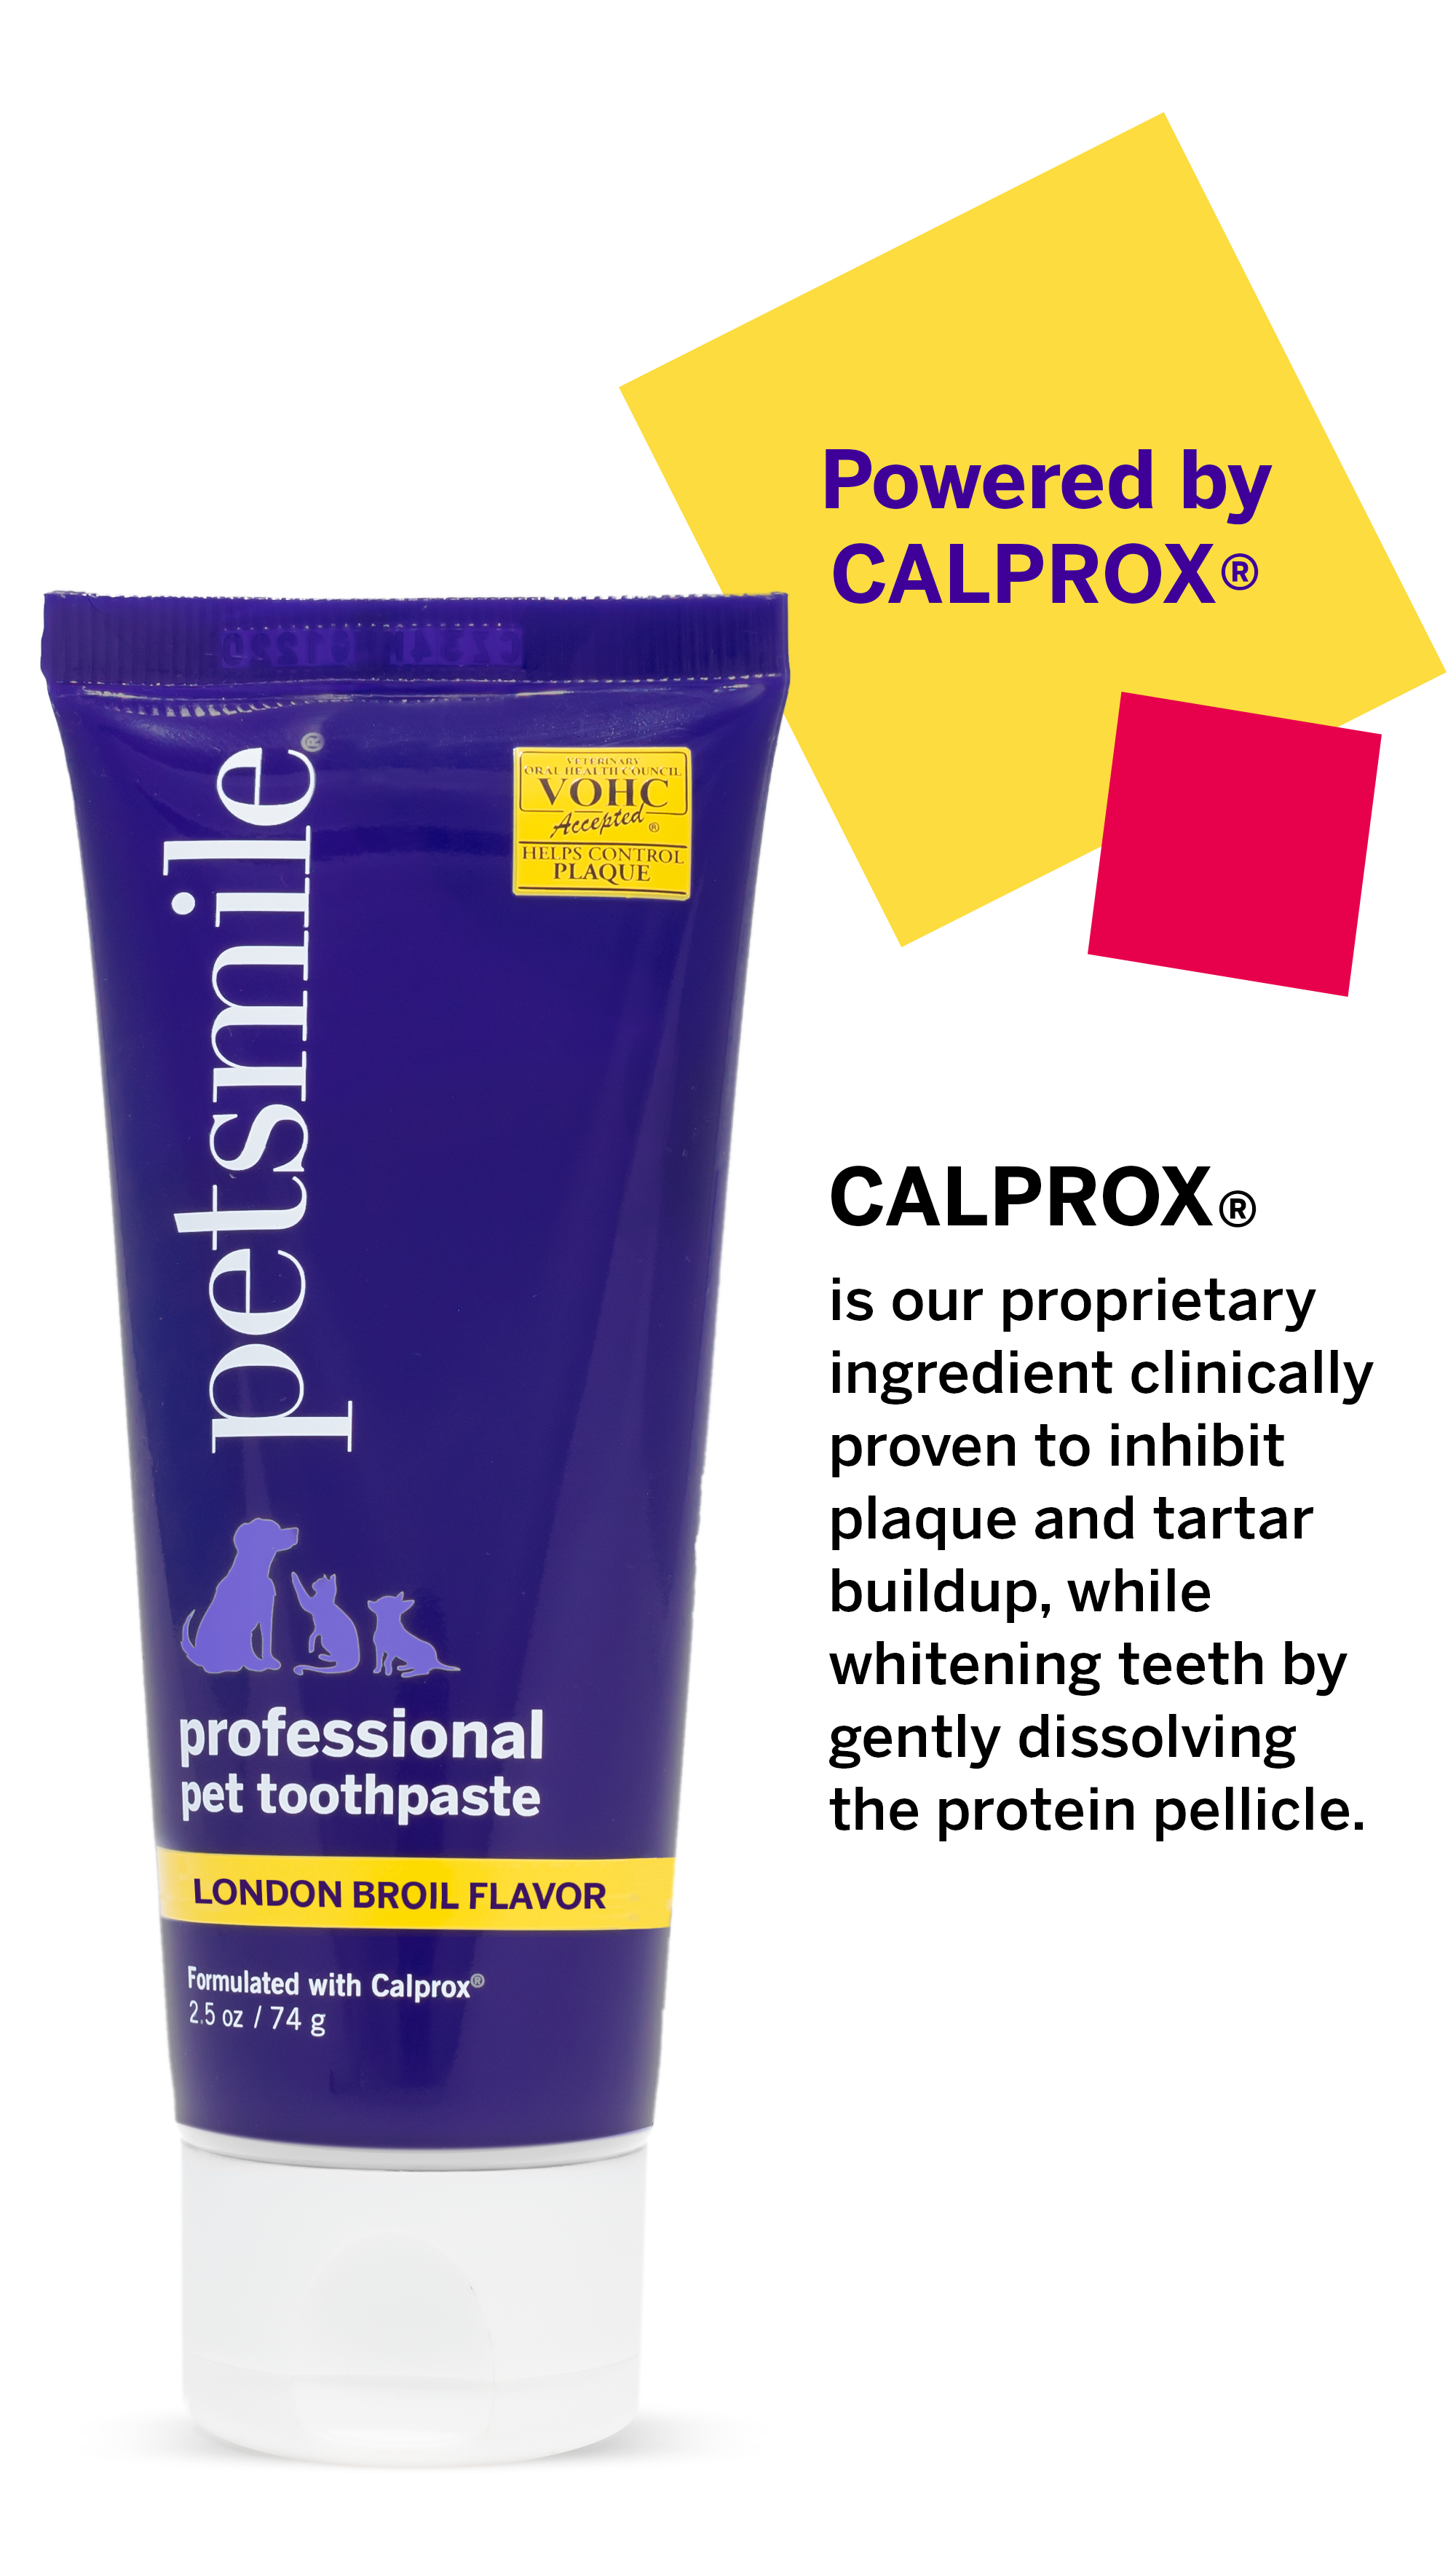 VOHC sealed small petsmile professional cat toothpaste , 2.5 OZ London Broil Flavor cat toothpaste , Small cat toothpaste with Calprox , Calprox for superior dental care , BPA free cat toothpaste , Calprox inhibits plaque and tartar